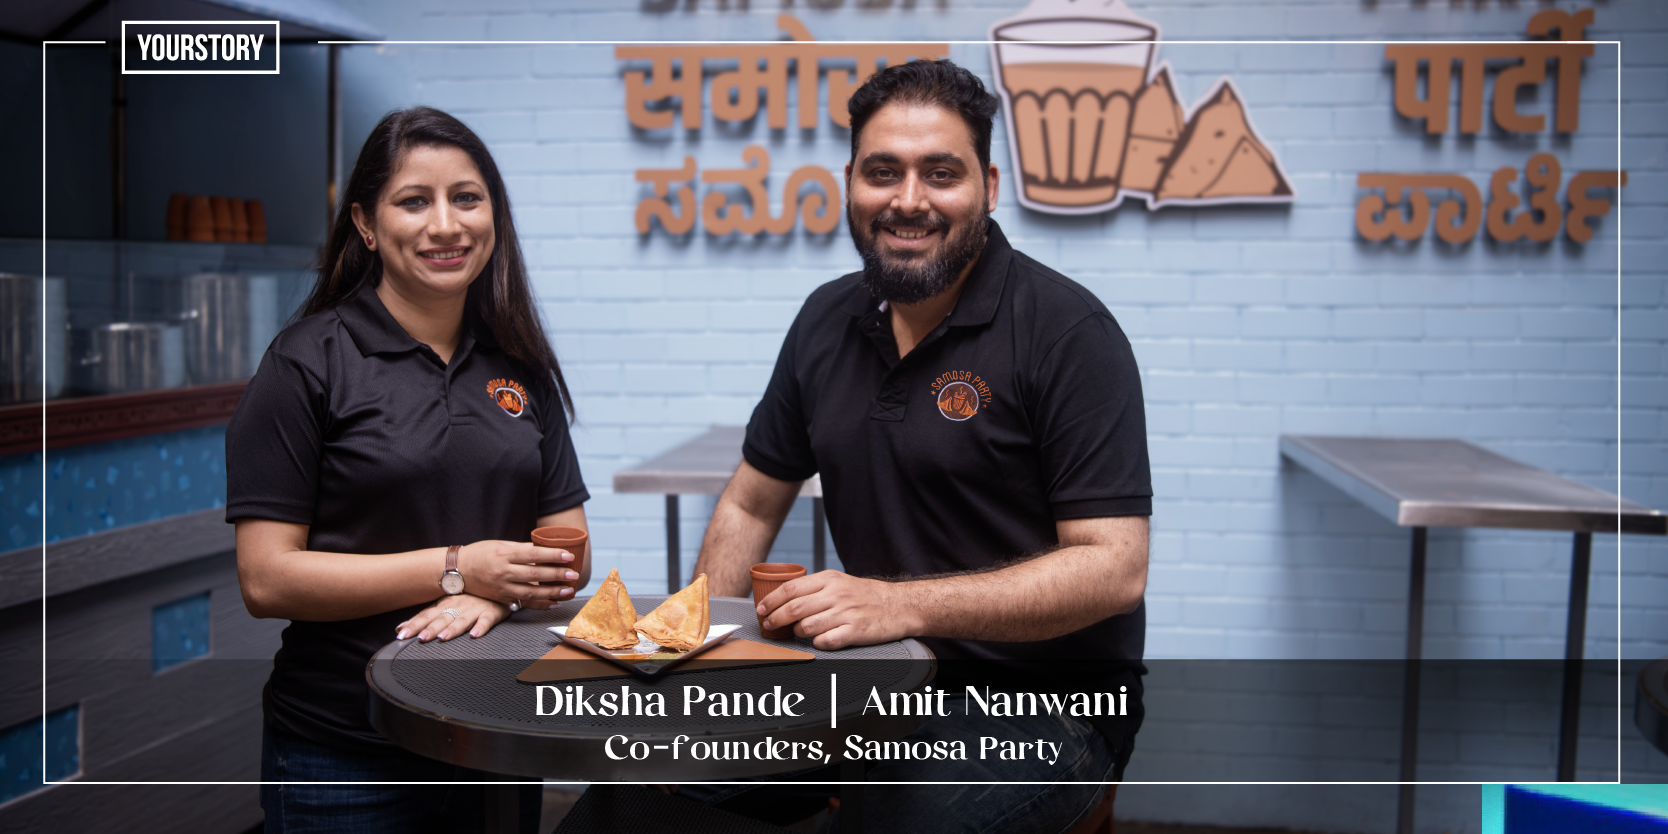 Selling 50 lakh samosas a year, Samosa Party is dressing up the humble snack with a sprinkle of tech, and it's working